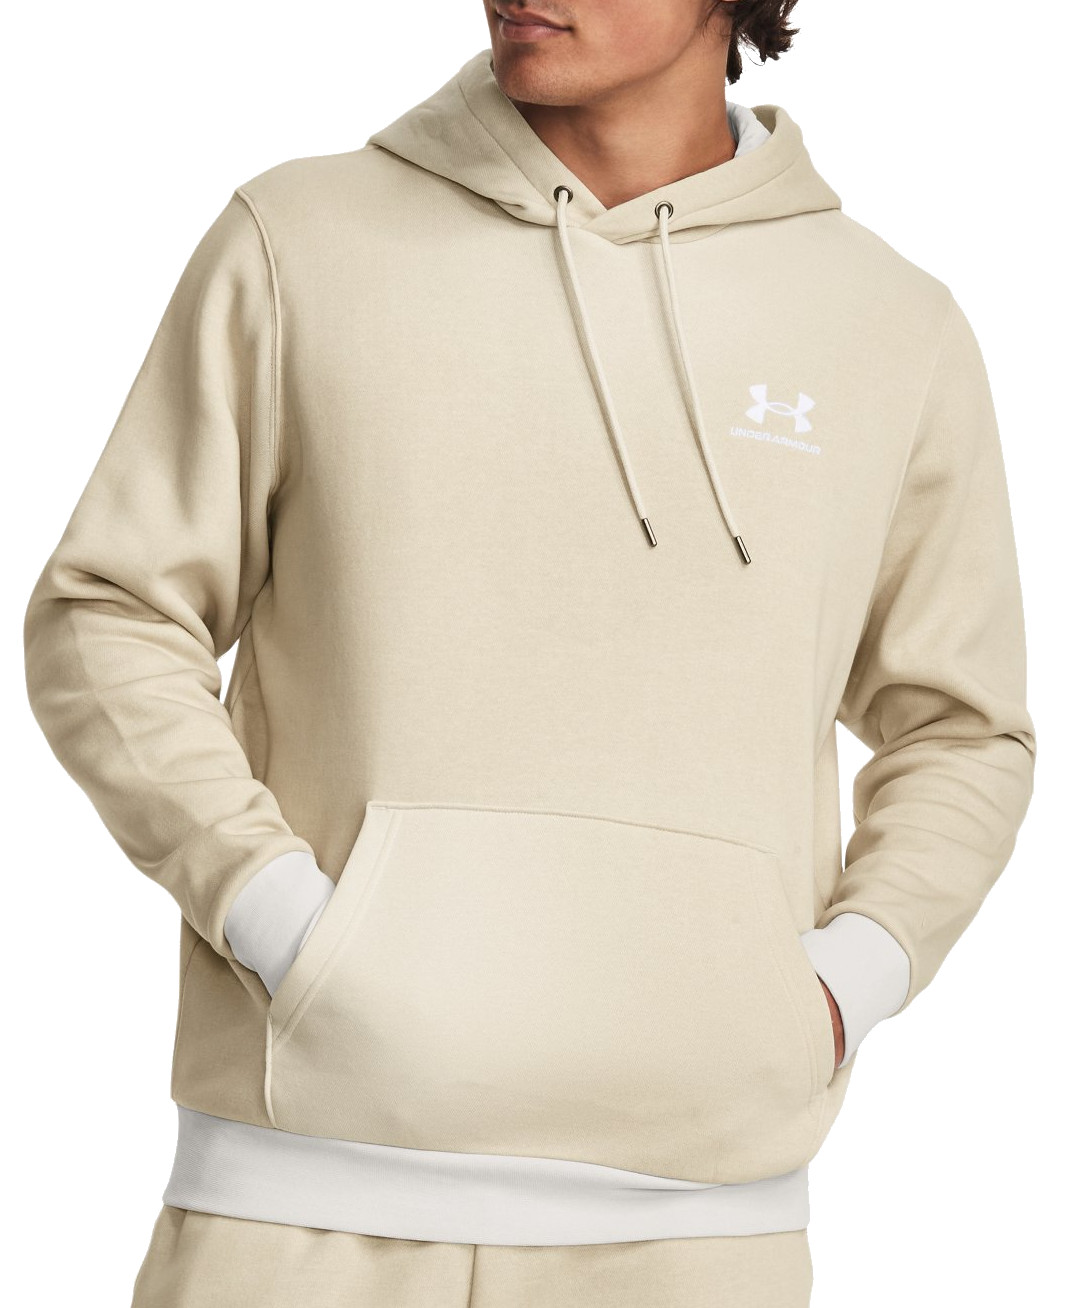 https://i1.t4s.cz/products/1381214-289/under-armour-under-armour-essential-fleece-663991-1381214-289.jpg